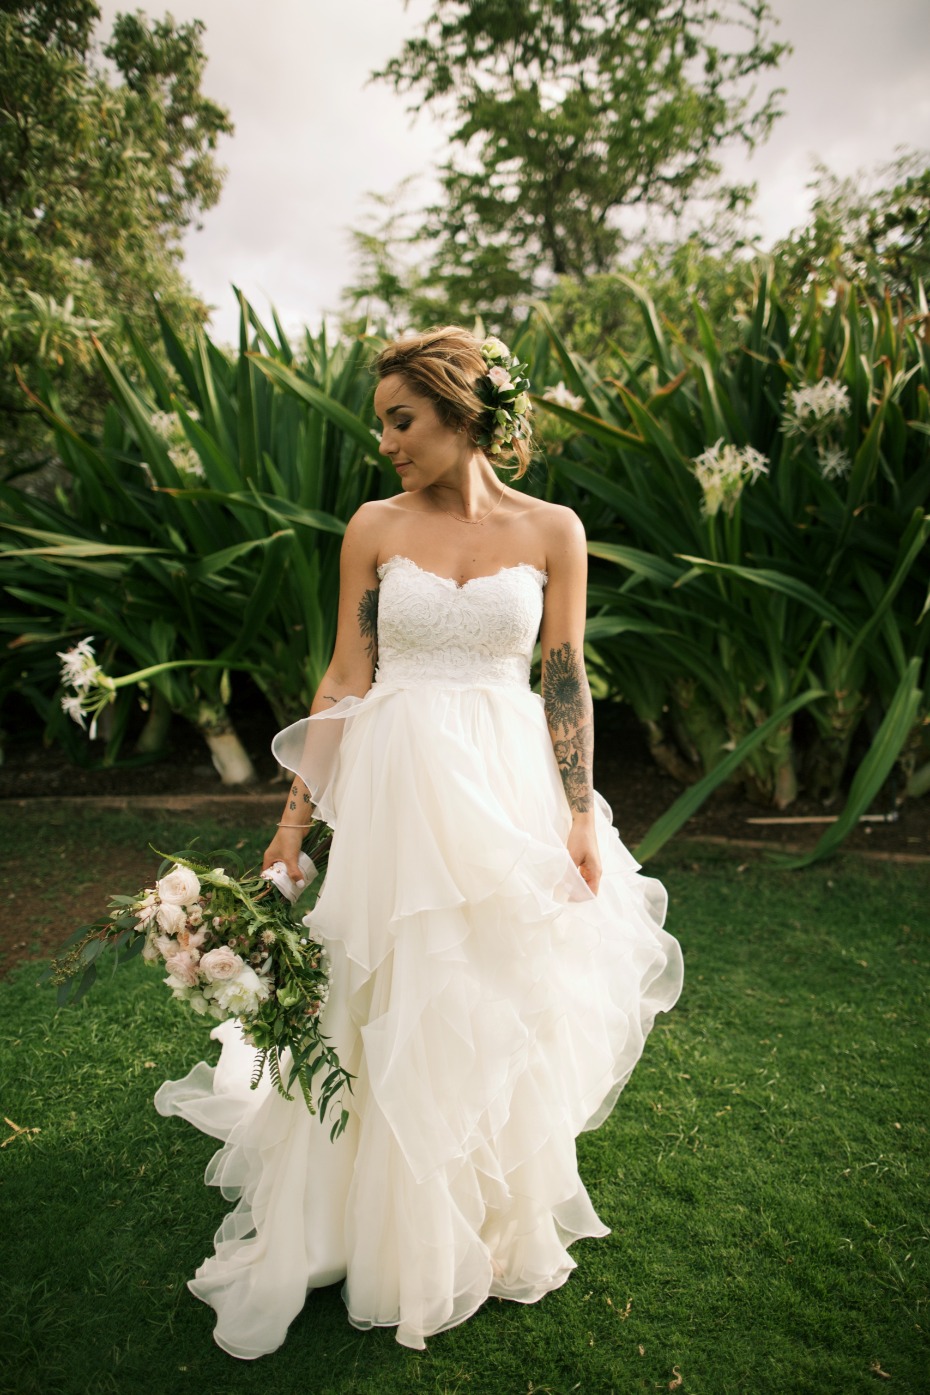 Flowing ruffle wedding dress from Hayley Paige